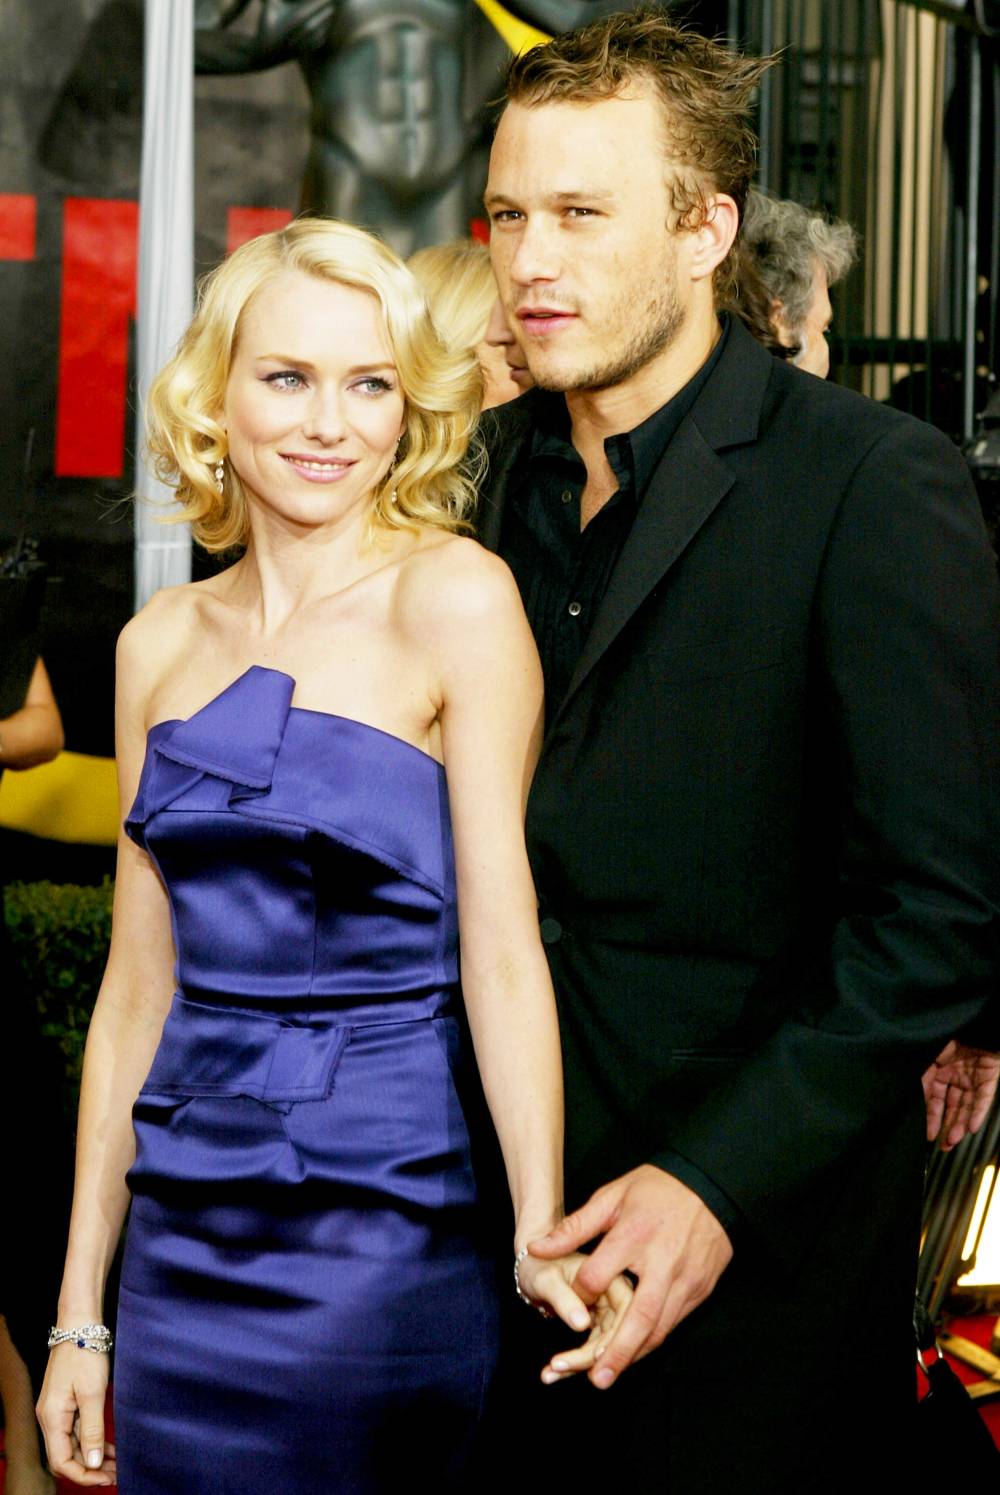 Heath Ledger and Naomi Watts attend the 10th Annual Screen Actors Guild Awards on February 22, 2004 at the Shrine Auditorium in Los Angeles, California.